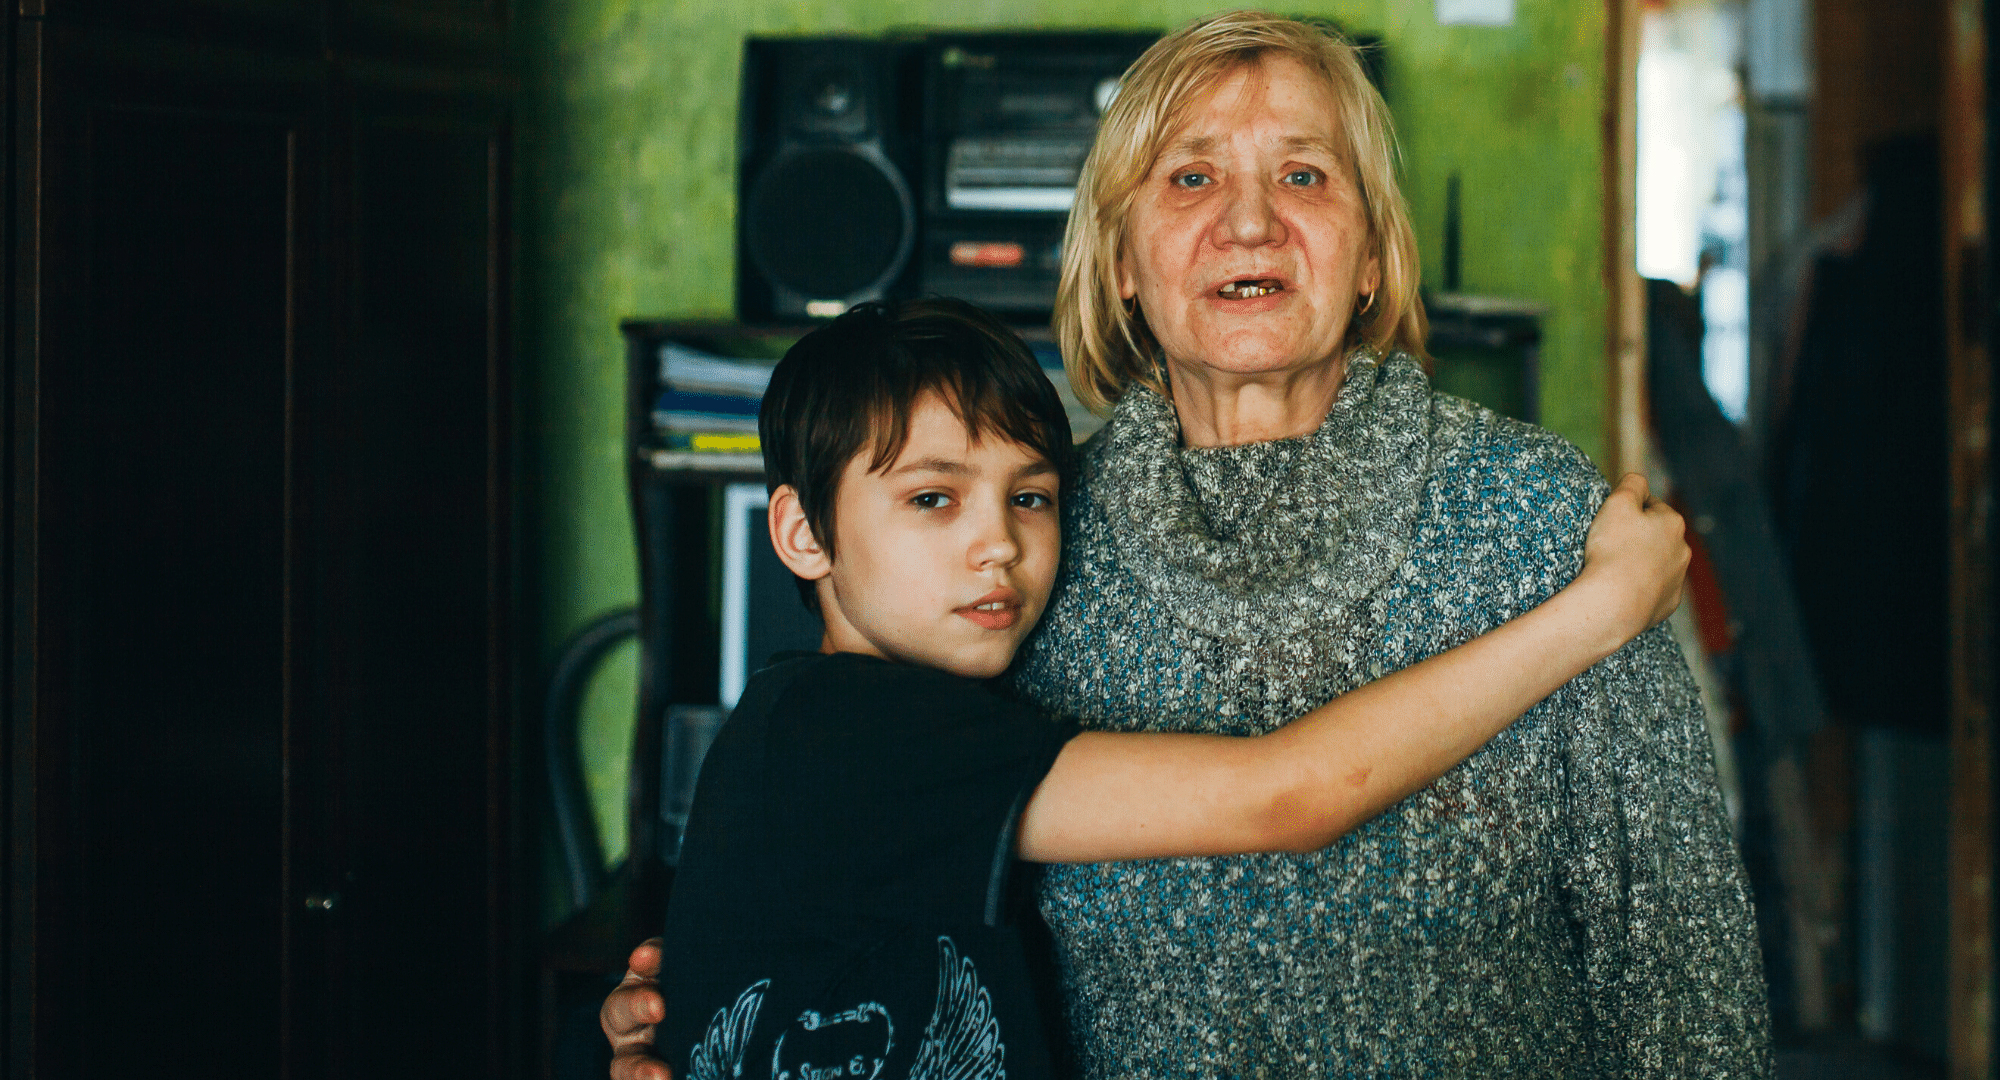 Surviving Conflict in eastern Ukraine <a href='https://www.mwbuk.org/news-stories/operation-christmas-love-in-ukraines-conflict-zone'>Read More</a>